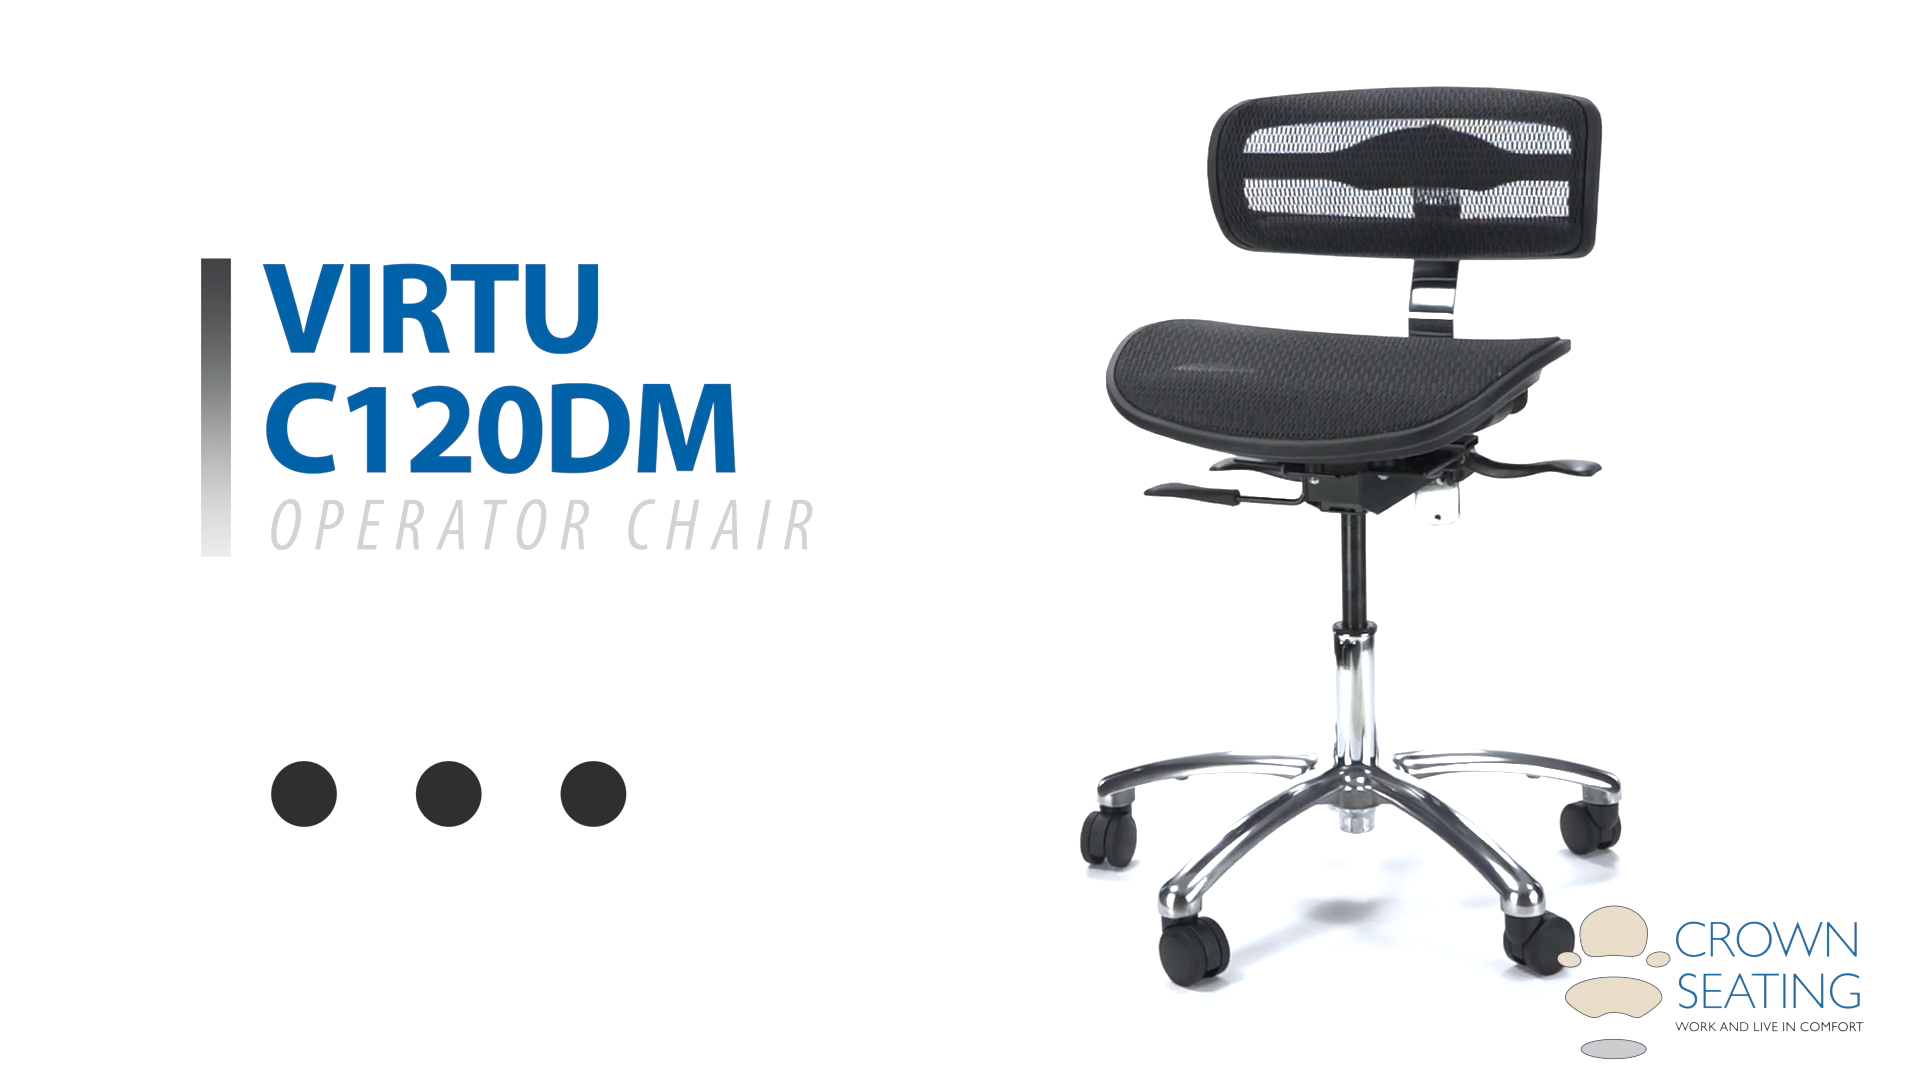 Online Shopping from Anywhere back support for chair at work